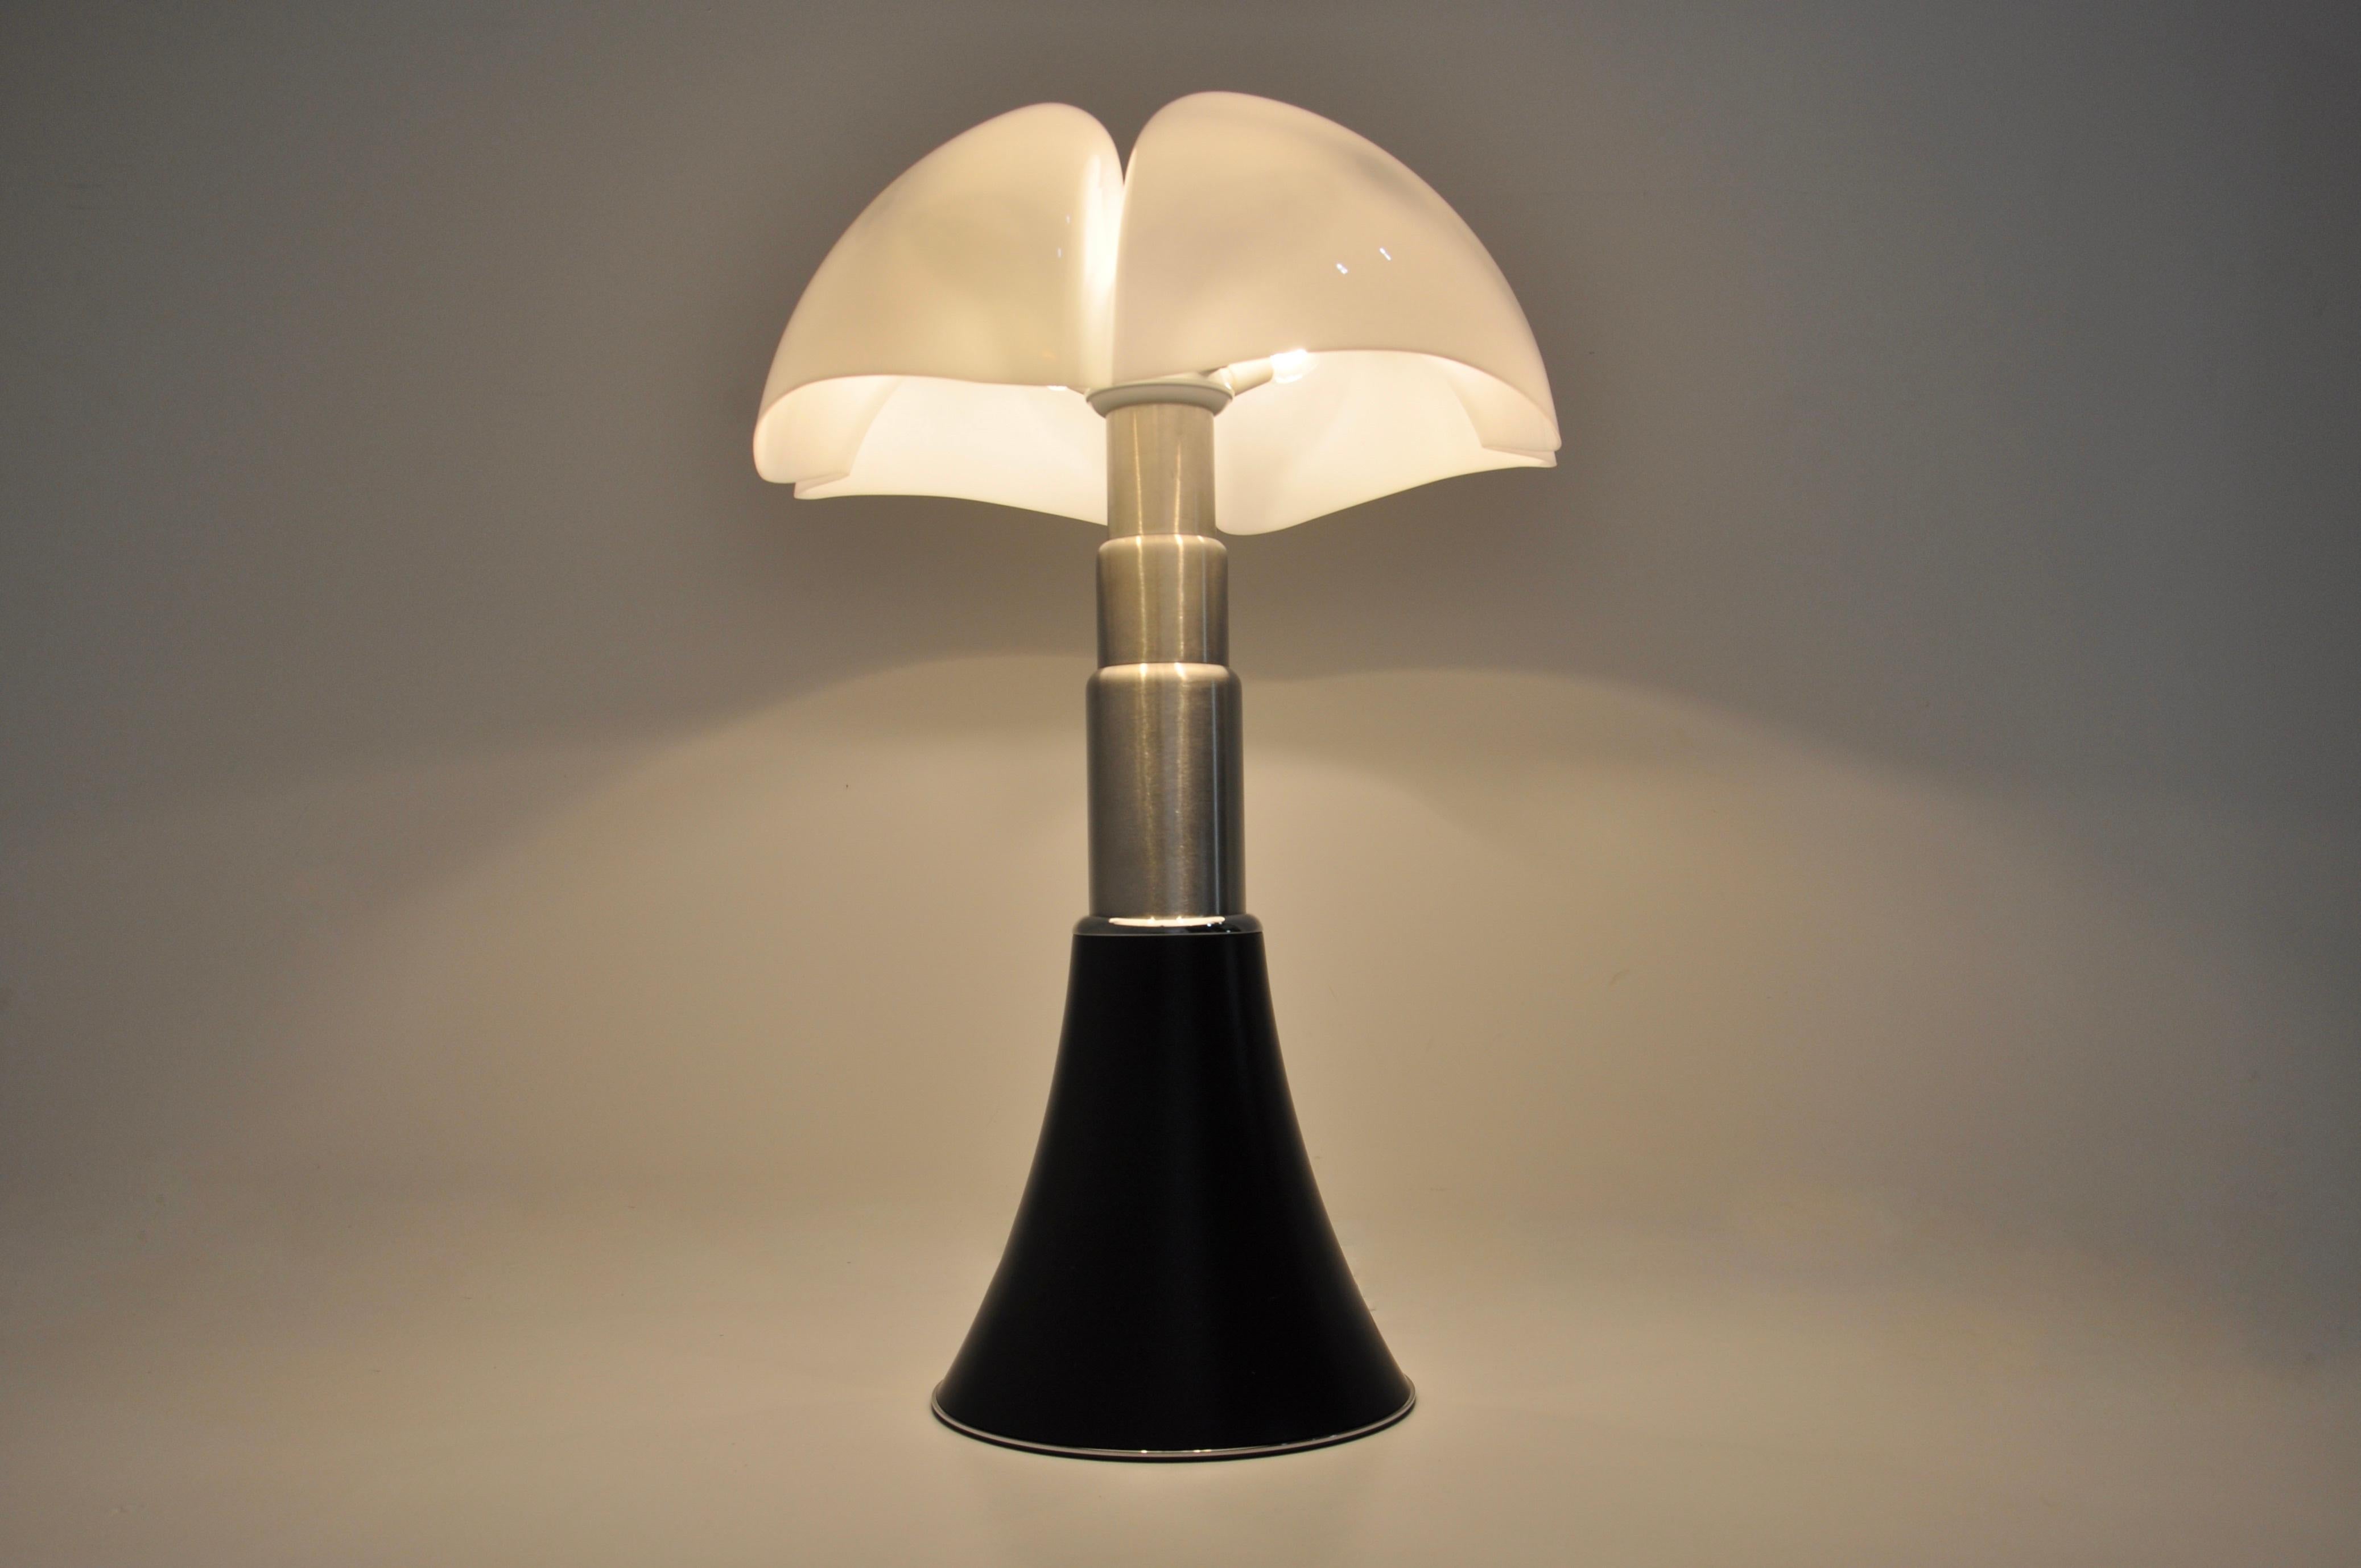 Black Pipistrello Table Lamp by Gae Aulenti for Martinelli Luce In Good Condition For Sale In Lasne, BE